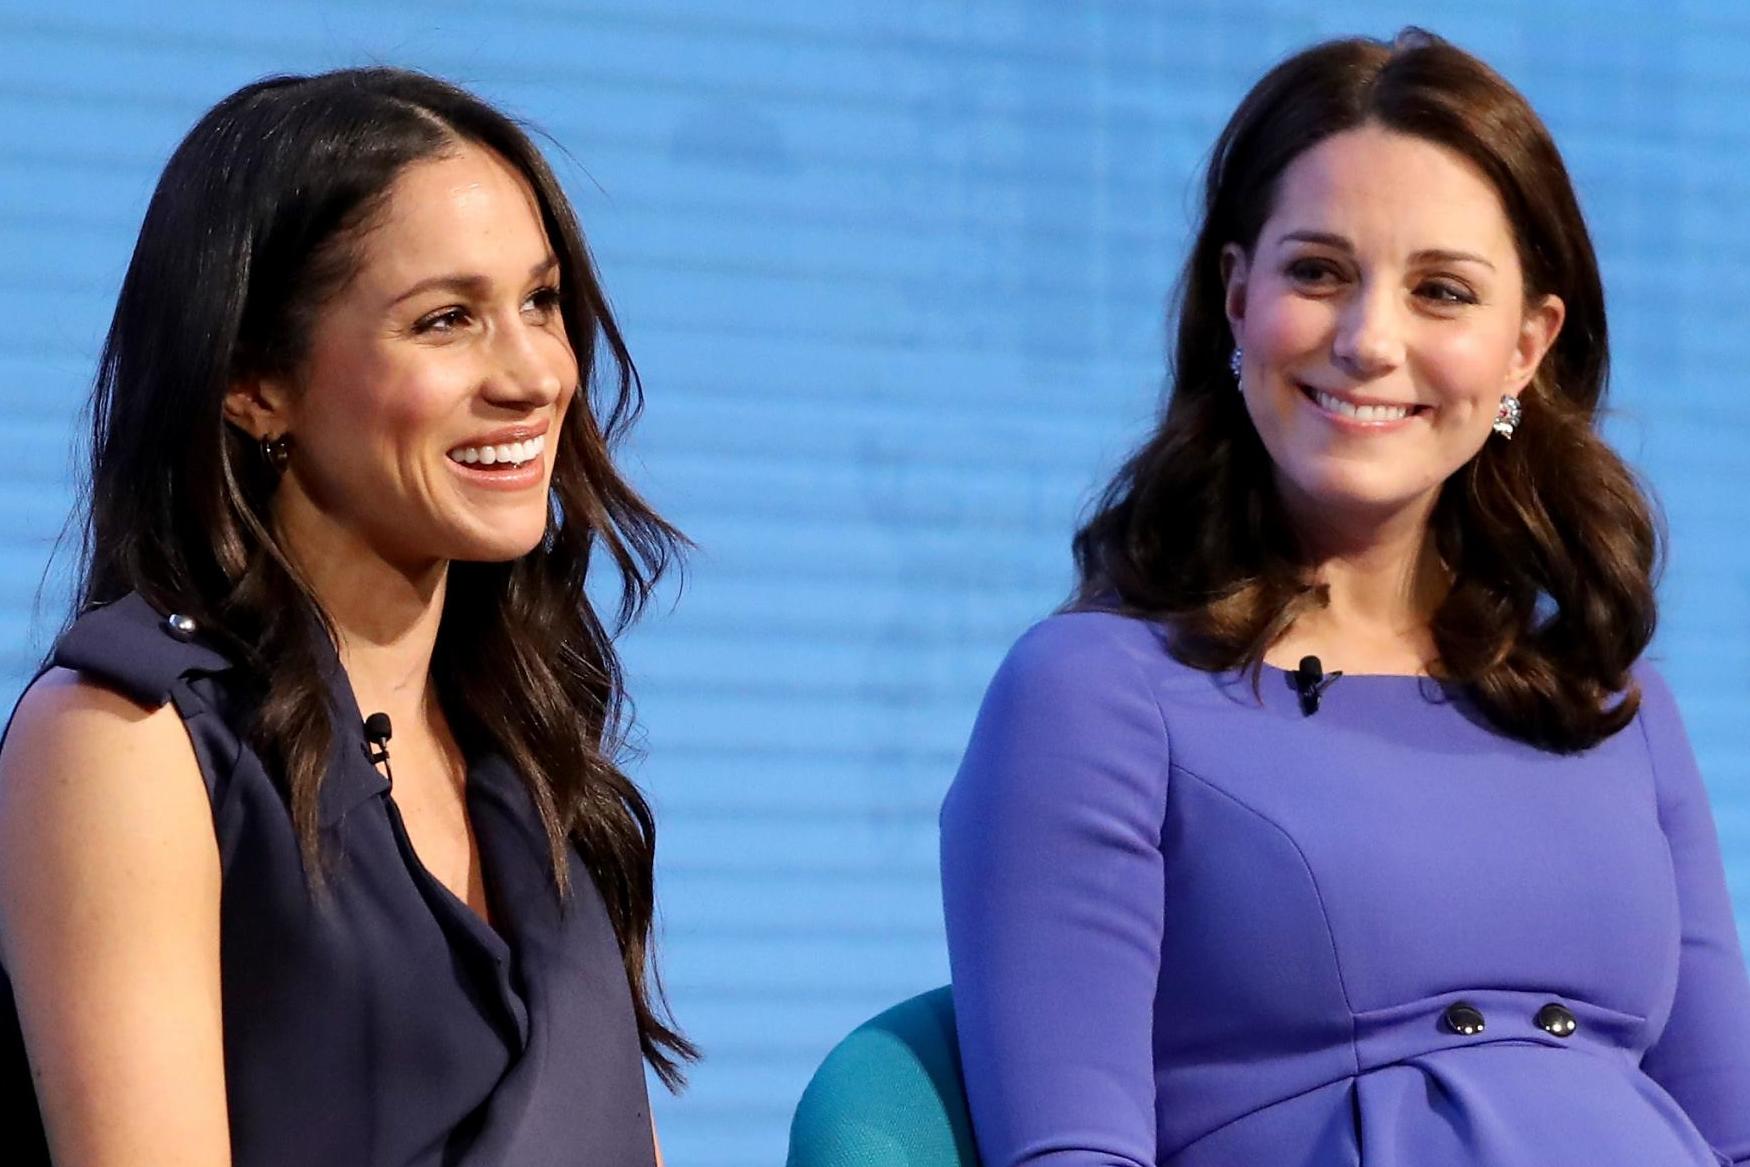 Meghan Markle and Catherine, Duchess of Cambridge attend the first annual Royal Foundation Forum held at Aviva on February 28, 2018